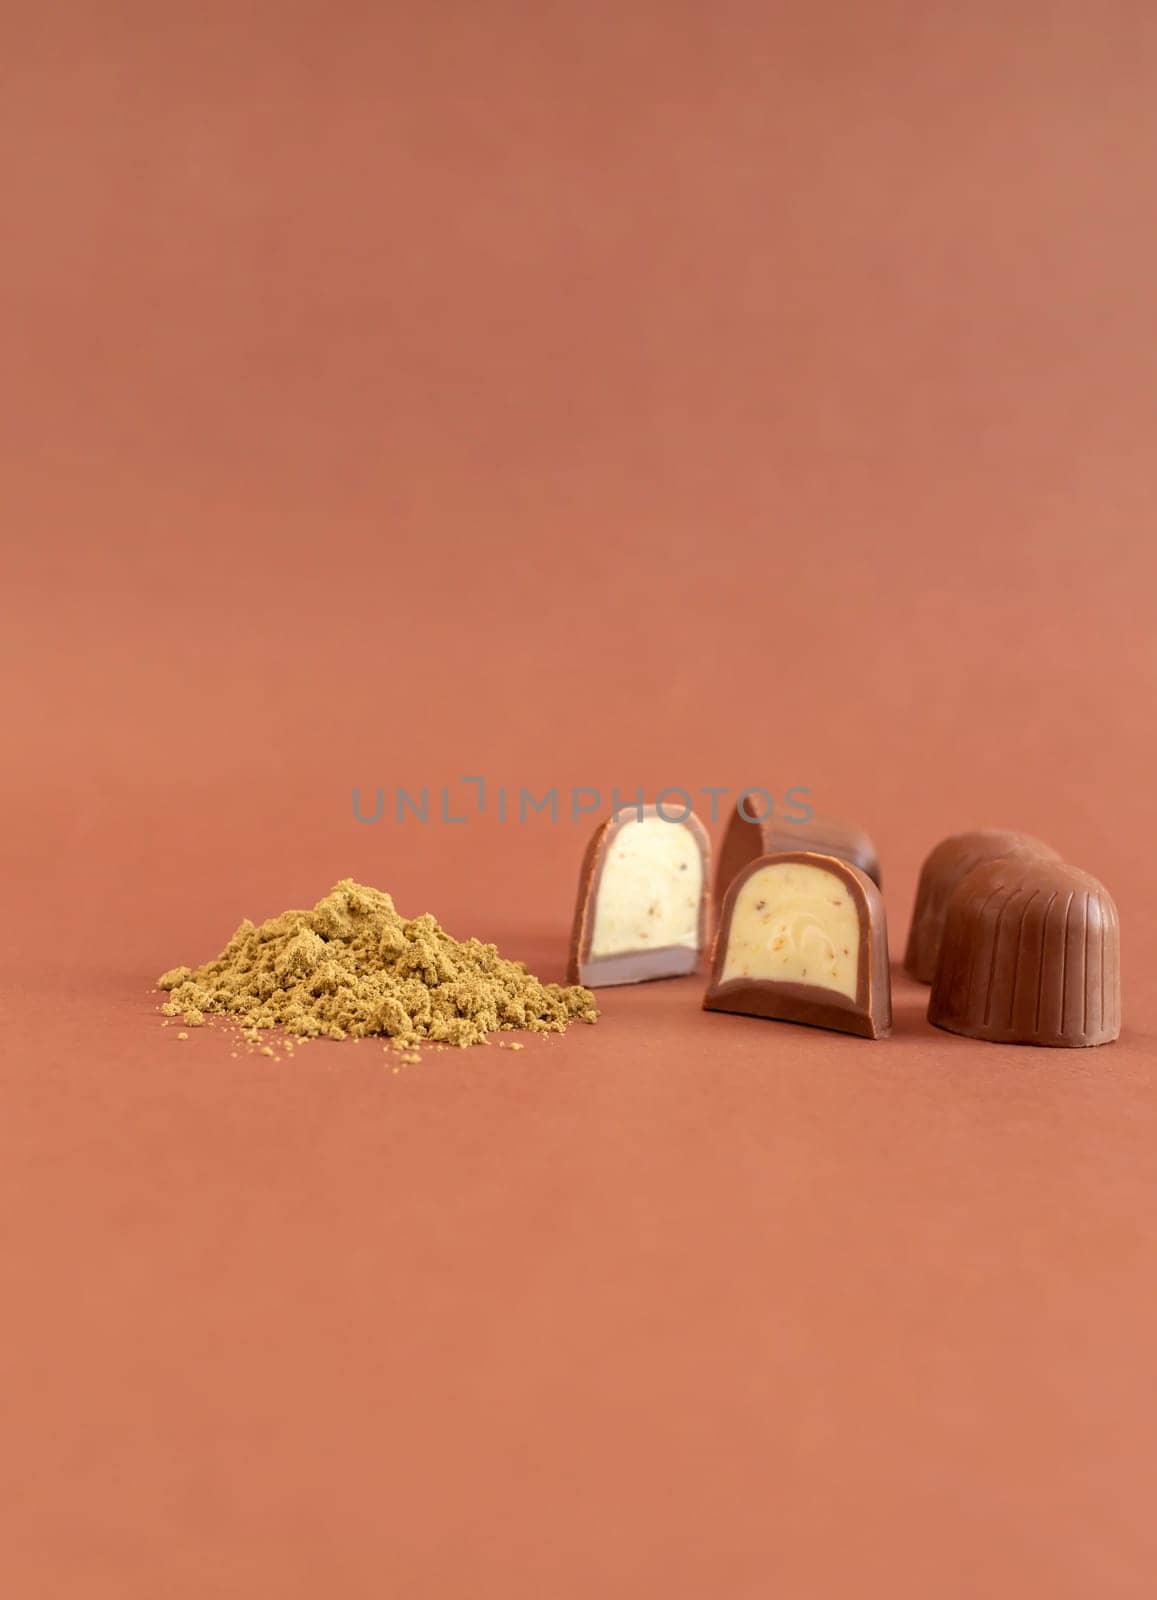 Mockup Brown Cannabis Chocolate Sweets And Green Hemp Protein Powder On Brown Background. Vertical Plane. Copy Space For Text. Healthy Snack. by netatsi